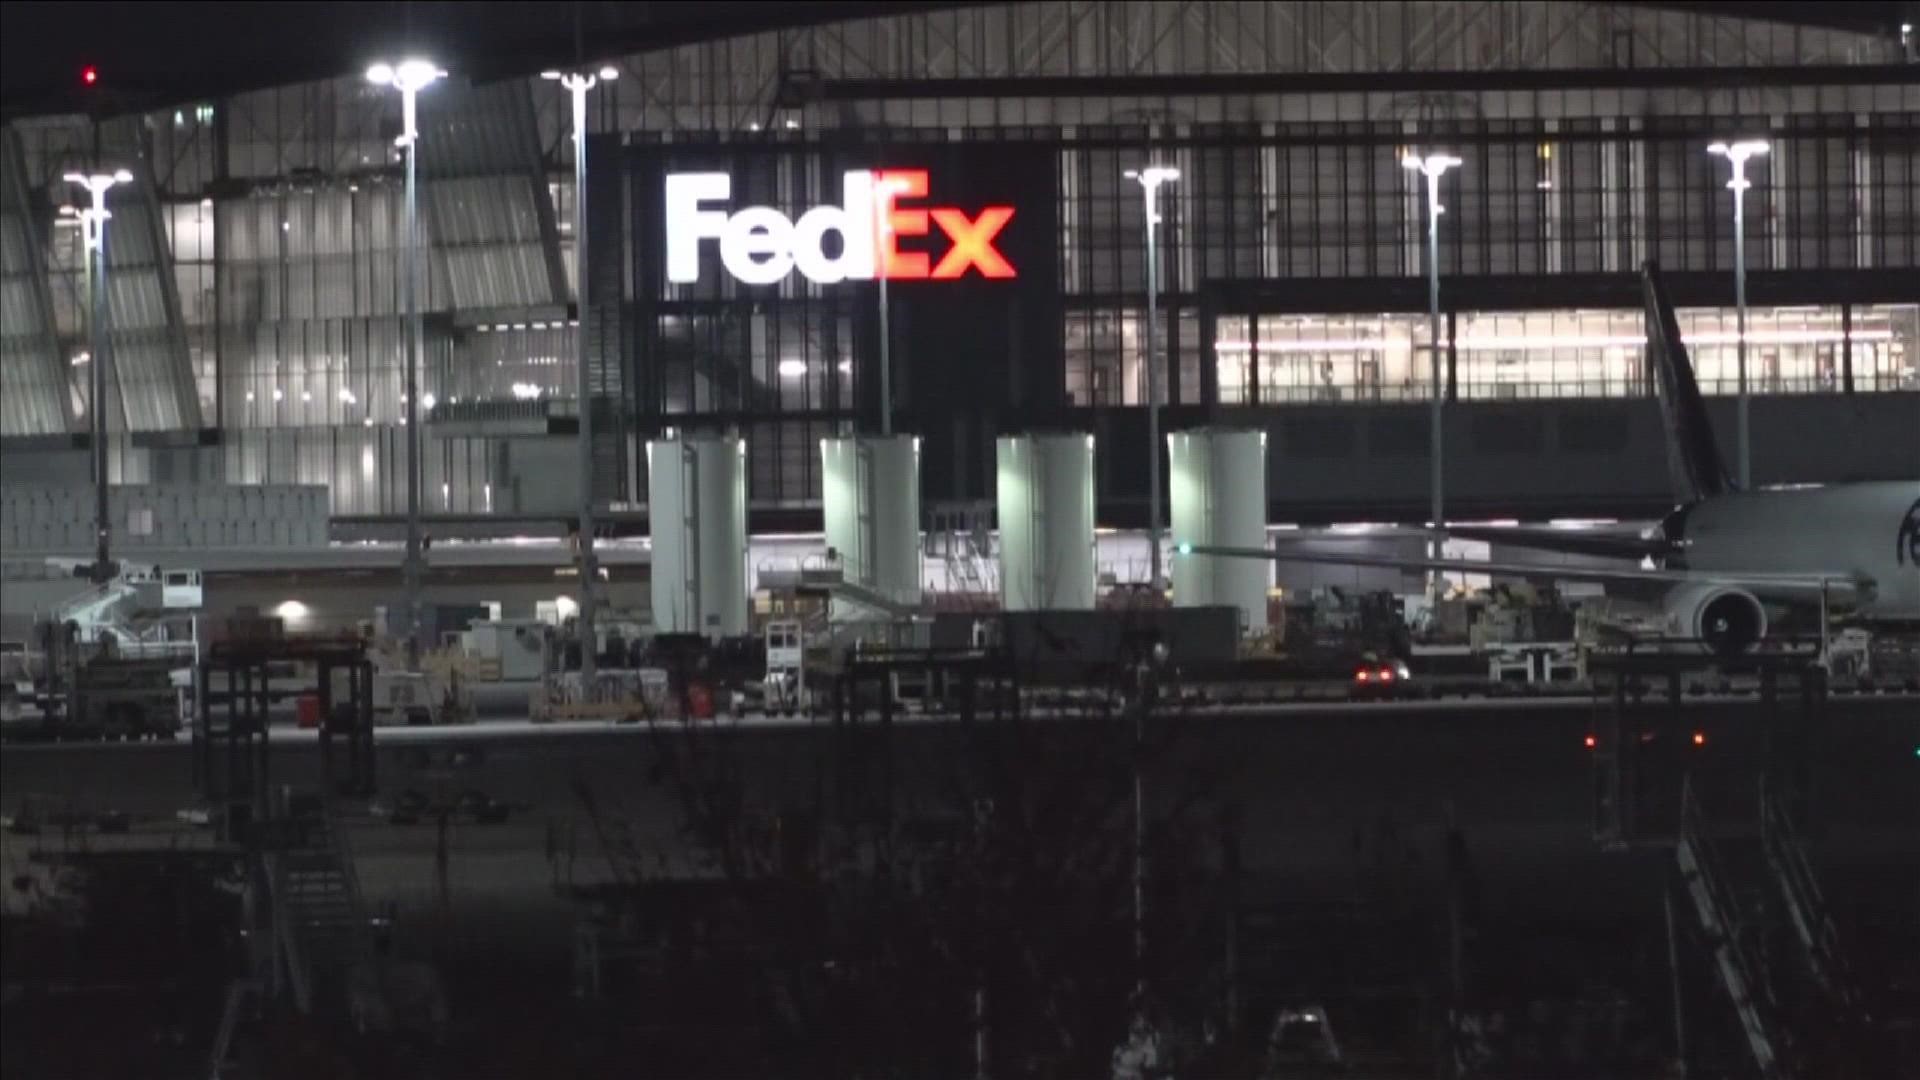 "Our heartfelt thoughts are with our team member’s family, colleagues and all those affected by this event," FedEx said. No details have been released at this time.